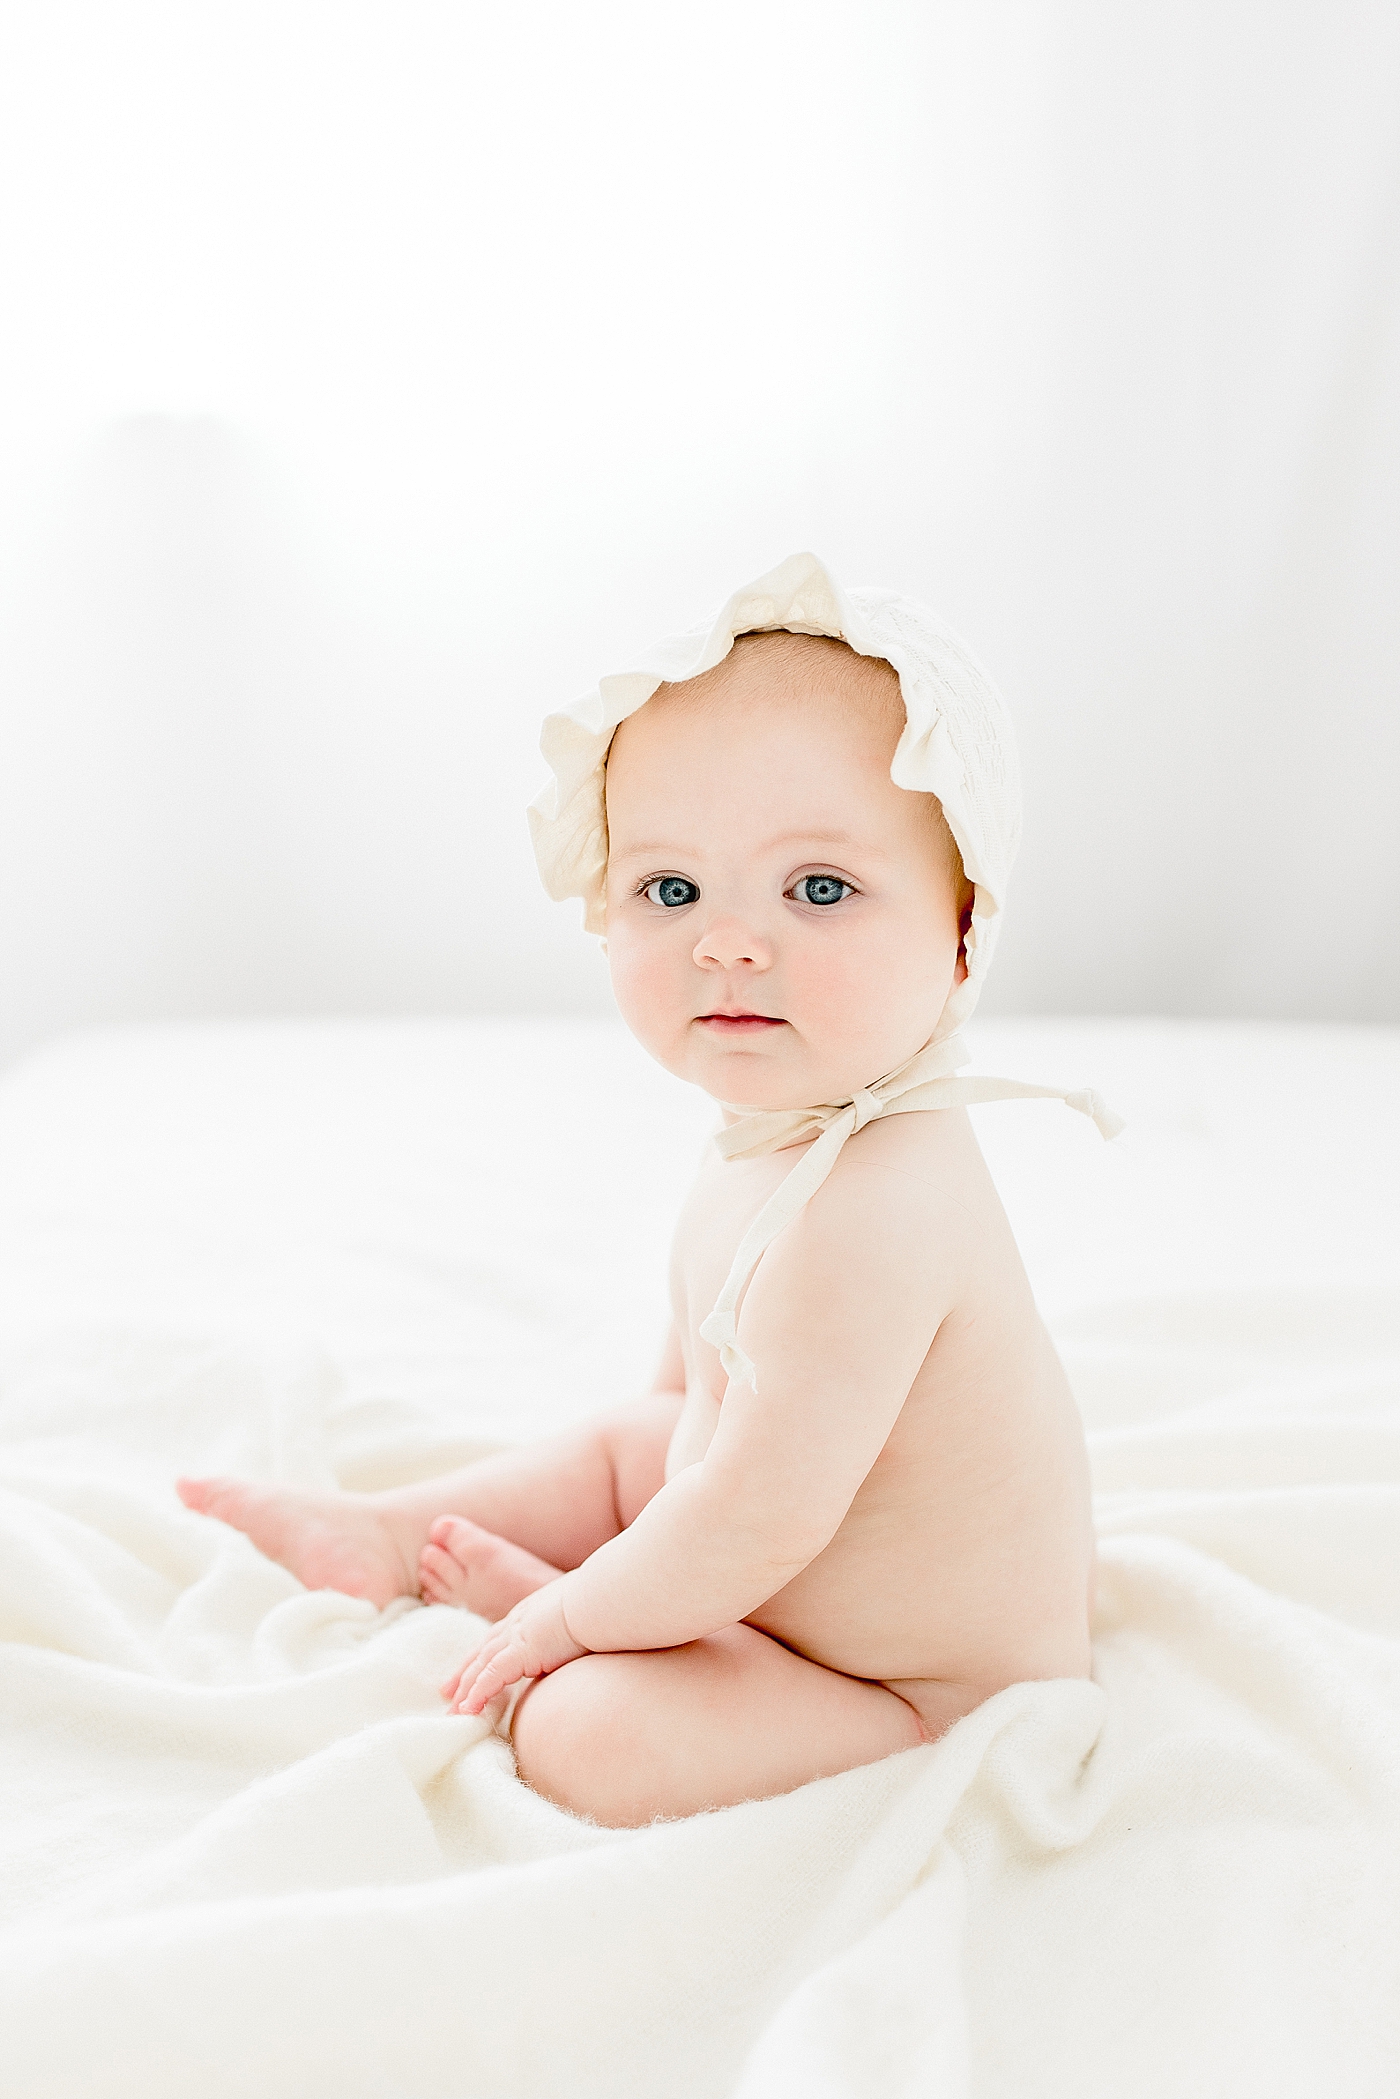 Six month old baby girl sitting with a bonnet on. Photo by Brittany Elise Photography.